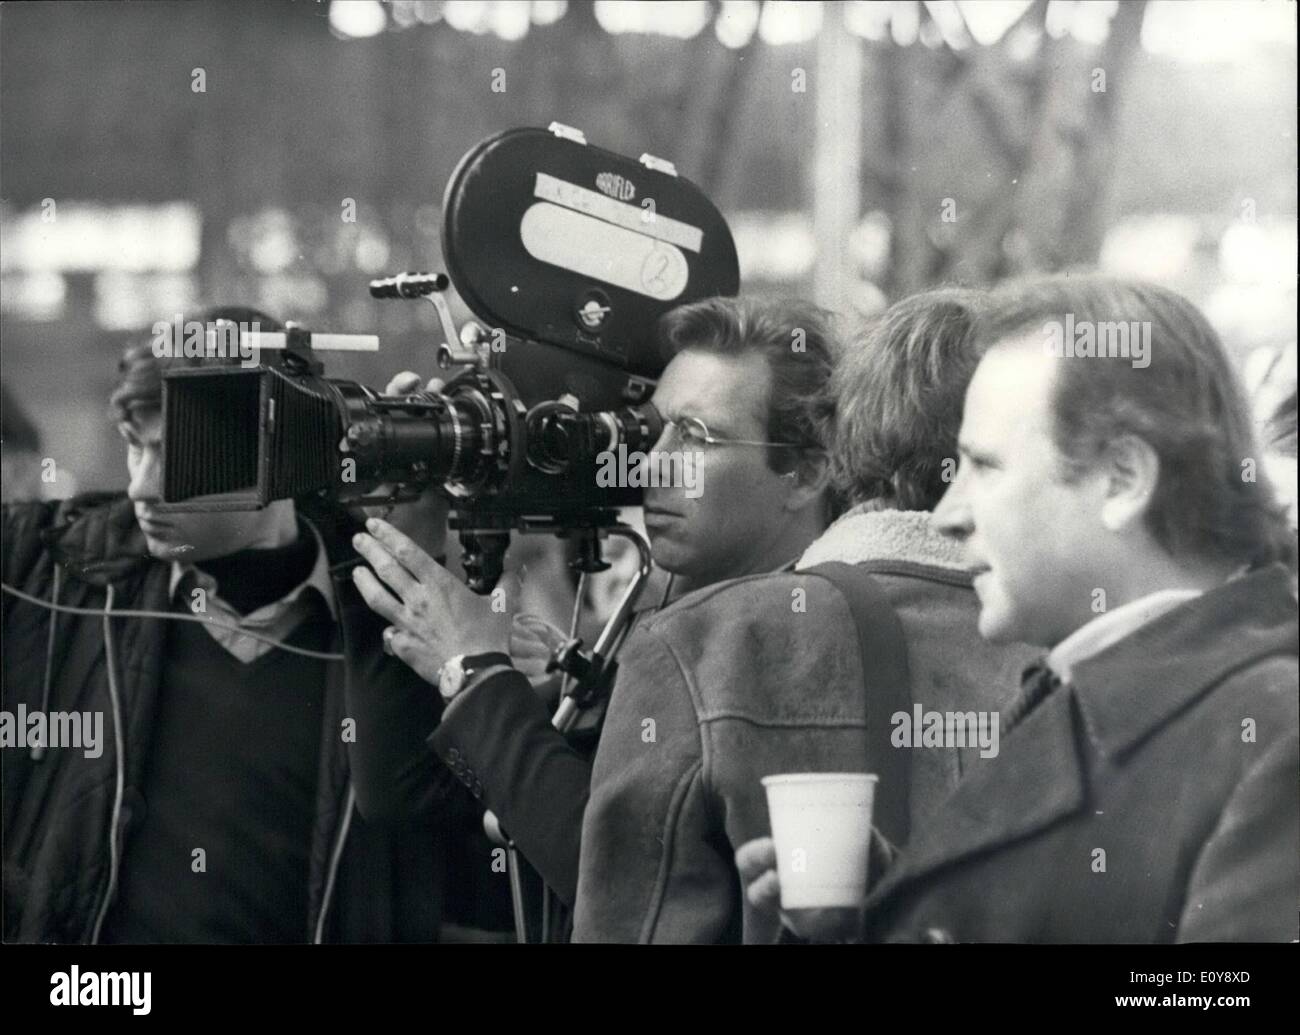 Feb. 02, 1969 - Lord Snowdon At Crufts Dog Shows: Lord Snowdon was at Crufts Dog Show today for the B.B.C., who are producing a Stock Photo